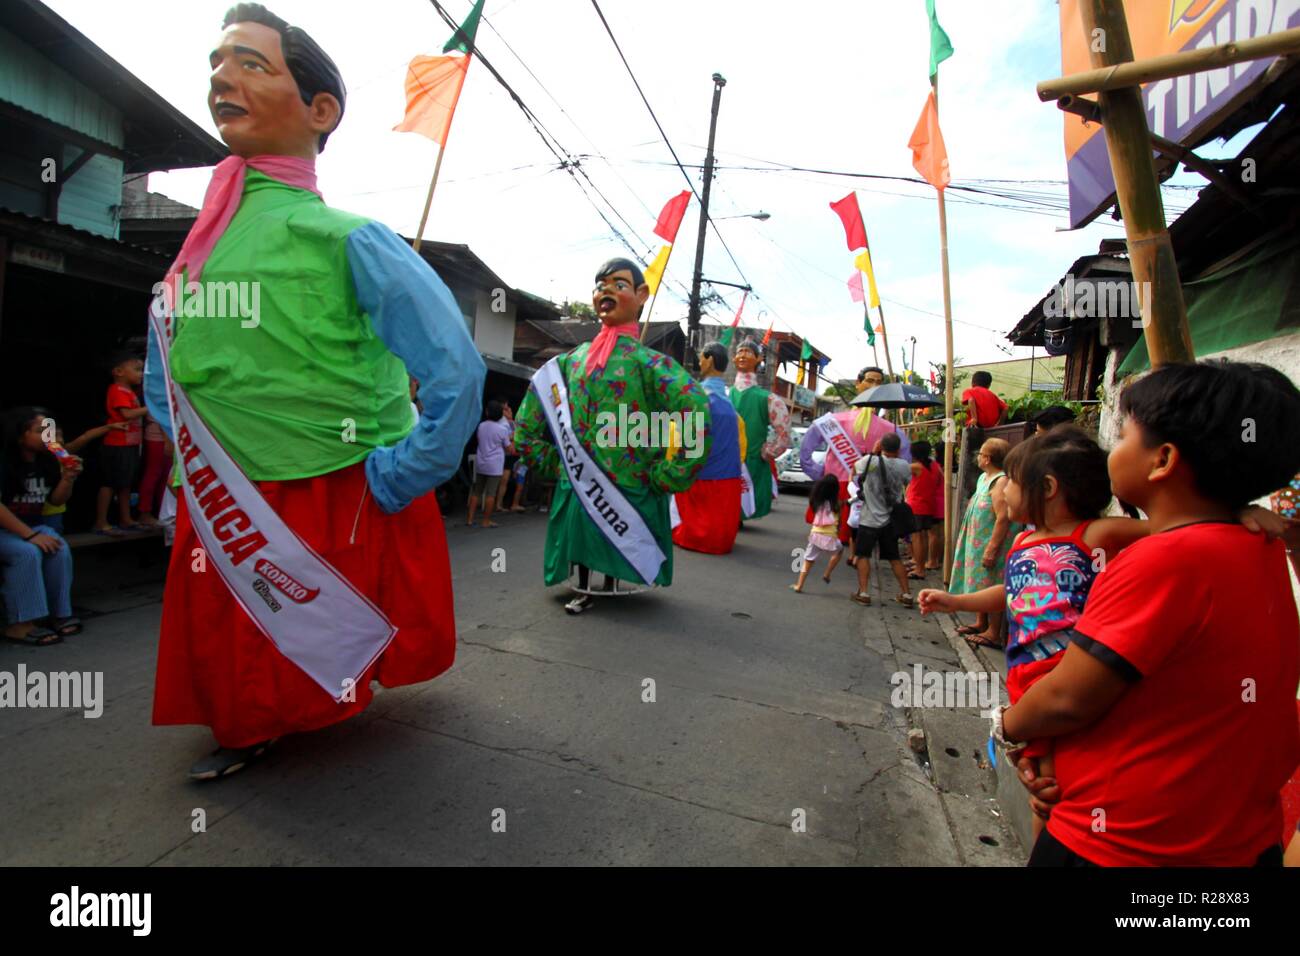 Philippines. 18th Nov, 2018. Higantes (Giant) effigy marches on the streets town of Angono province of Rizal on November 18, 2018. Higantes (Giant) Festival is celebrated November in the city of Angono, Province of Rizal in the Philippines to honor San Clemente, the patron saint of fishermen. The festival features a parade of hundreds of higantes, papier-mâché giants. Higantes (Giant) are puppets rendered as man or woman in various costumes; their face gives a commanding look, their hands on the waist. Credit: Gregorio B. Dantes Jr./Pacific Press/Alamy Live News Stock Photo